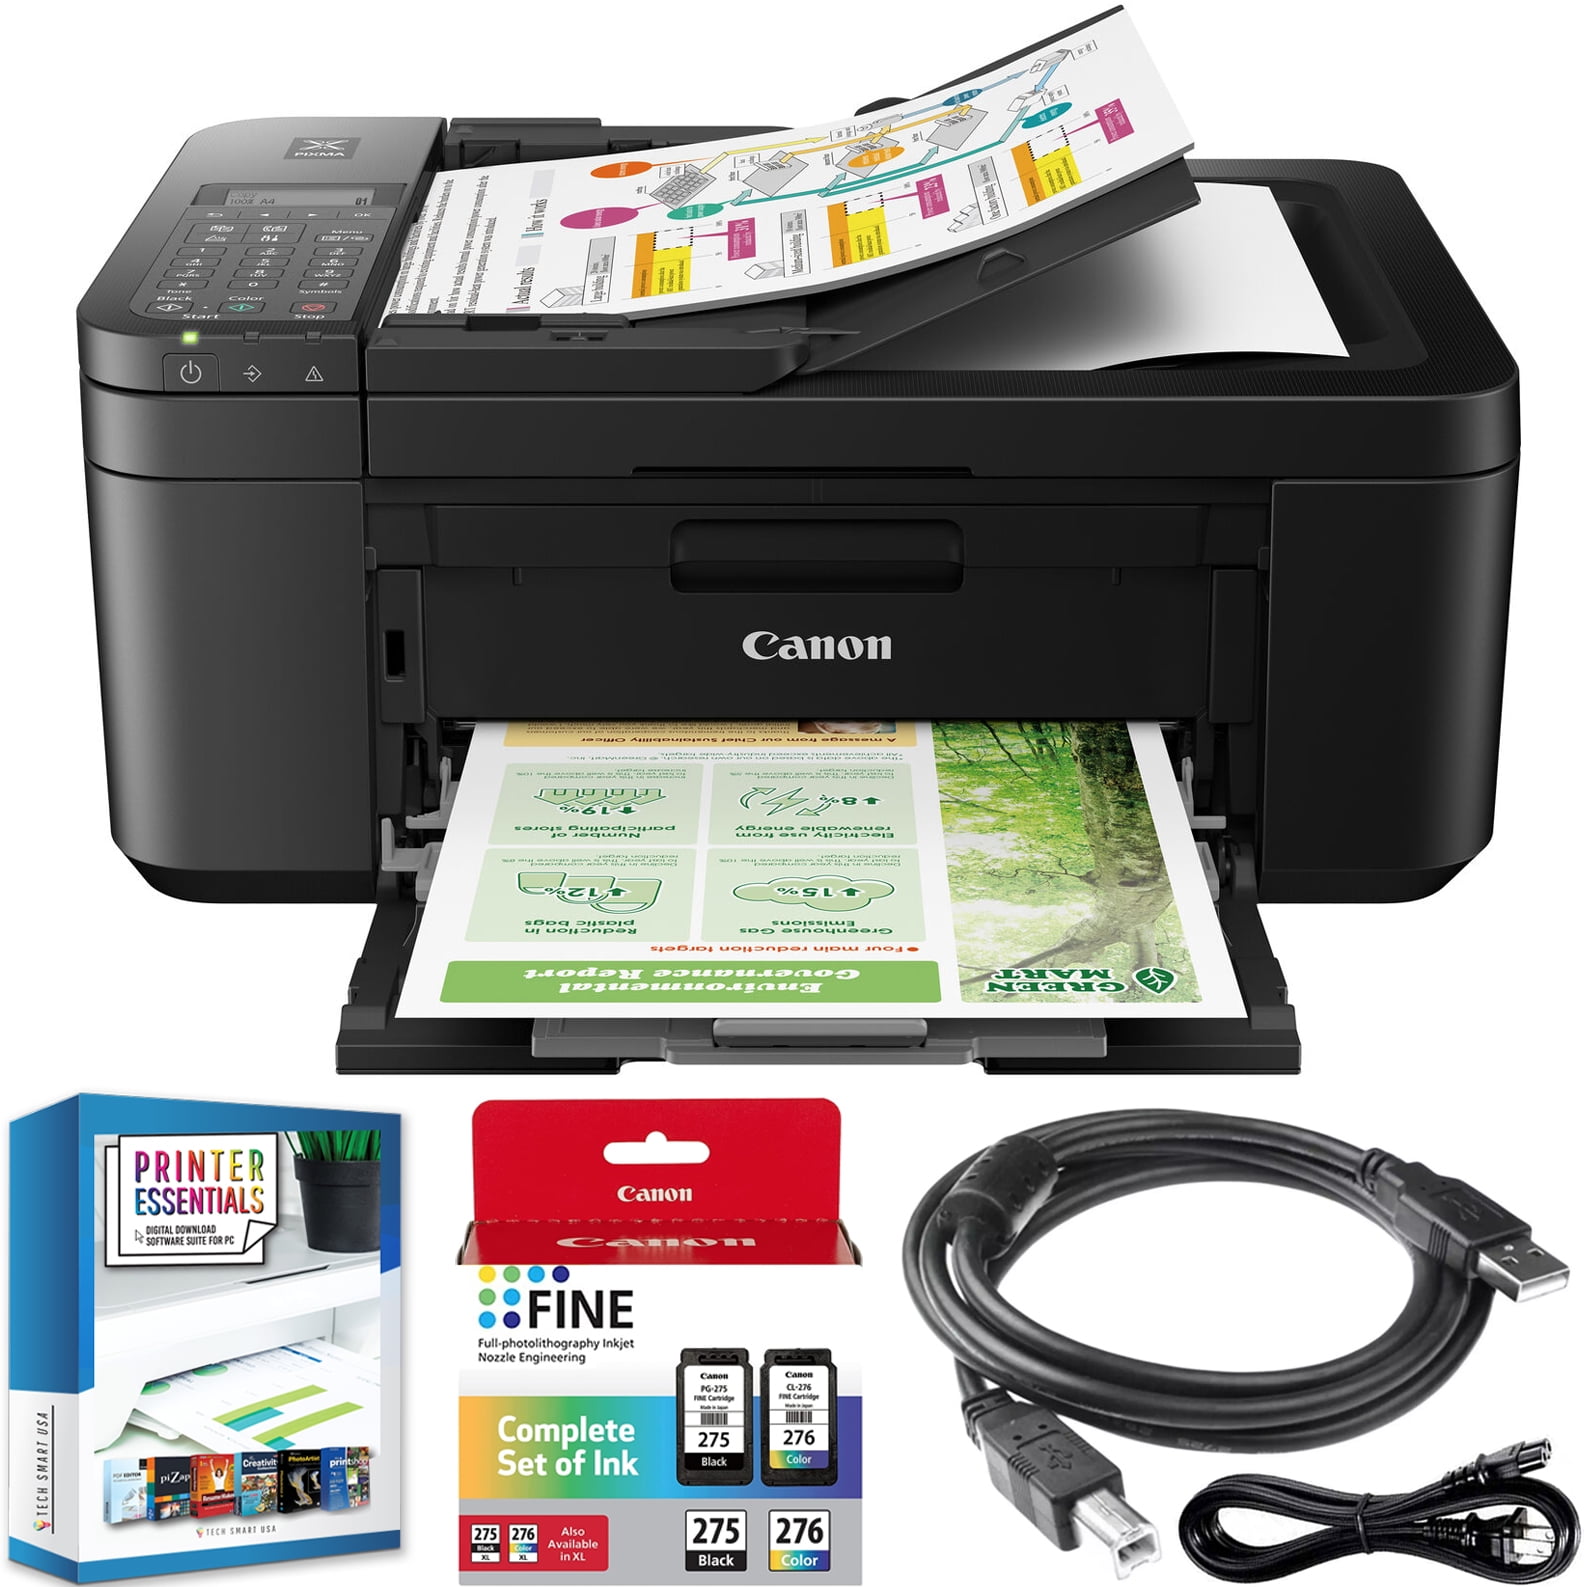 Seaport Fradrage Ugle Canon PIXMA TR4720 All-in-One Wireless Printer with Auto Document Feeder,  Mobile Printing, Copy, Fax and Scanner Black 5074C002 Bundle with DGE USB  Connection Cable + Small Business Software Kit - Walmart.com